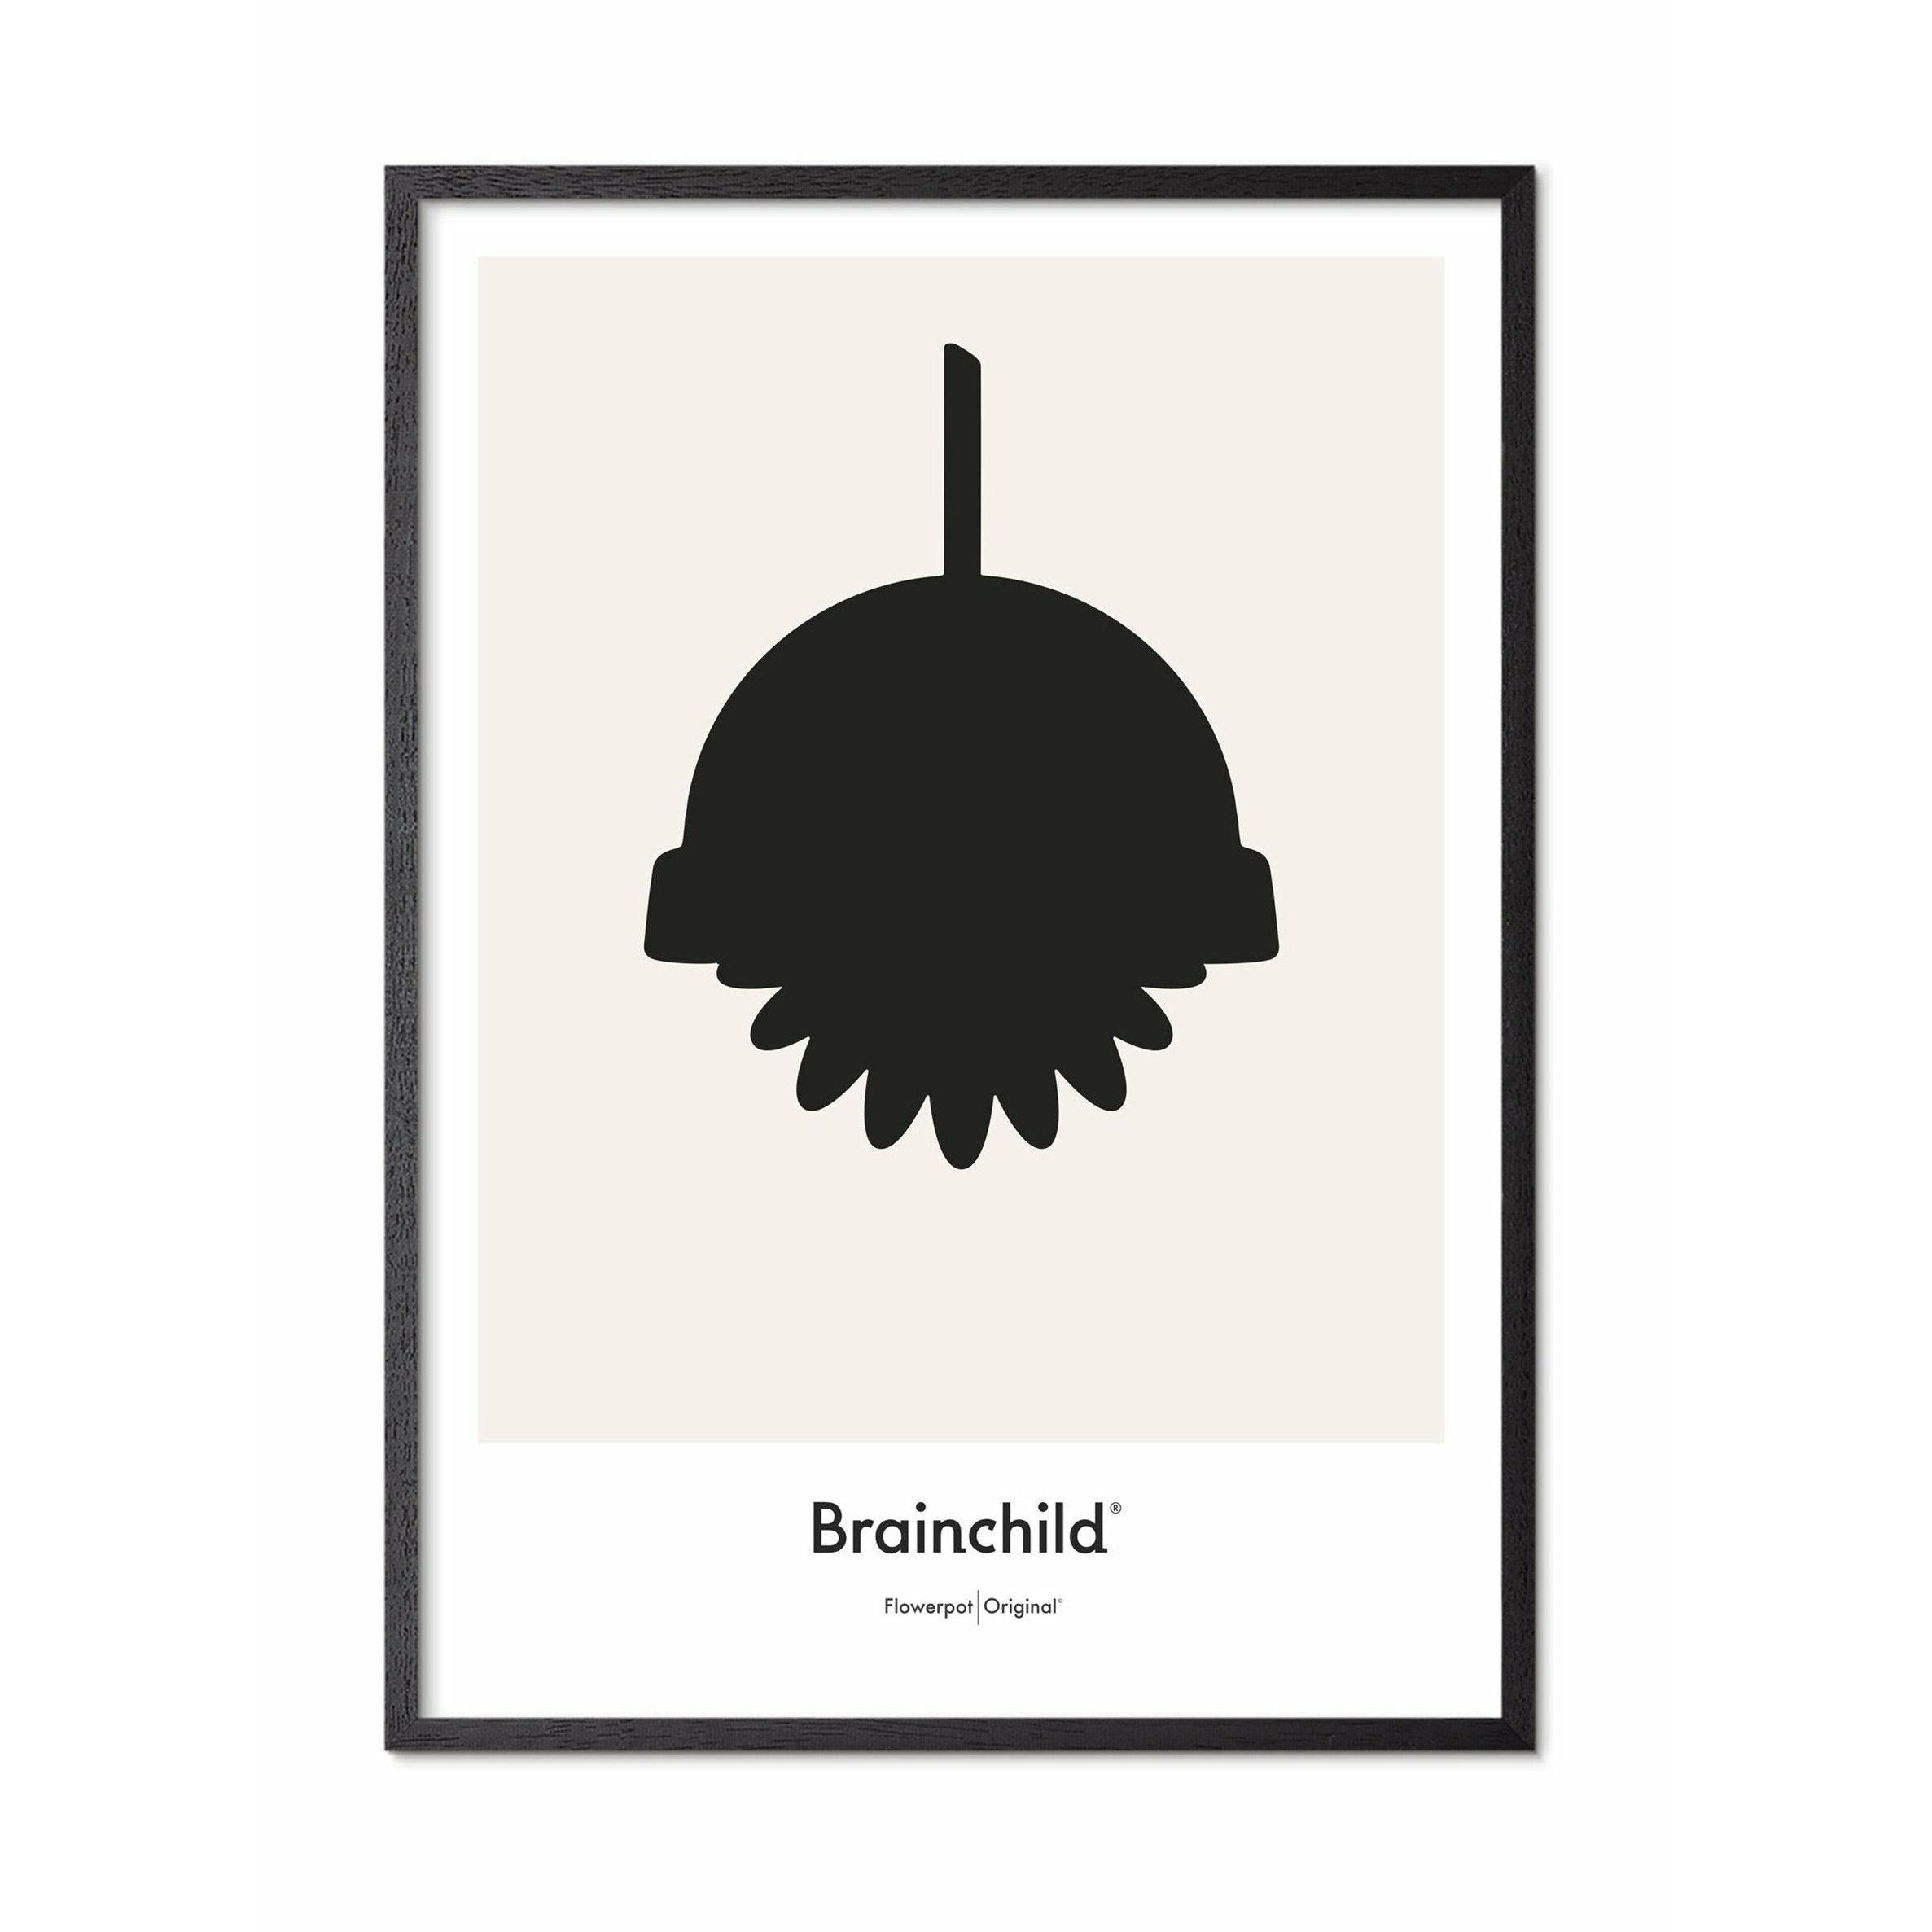 Brainchild Flower Pot Design Icon Poster, Frame Made Of Black Lacquered Wood 70 X100 Cm, Grey